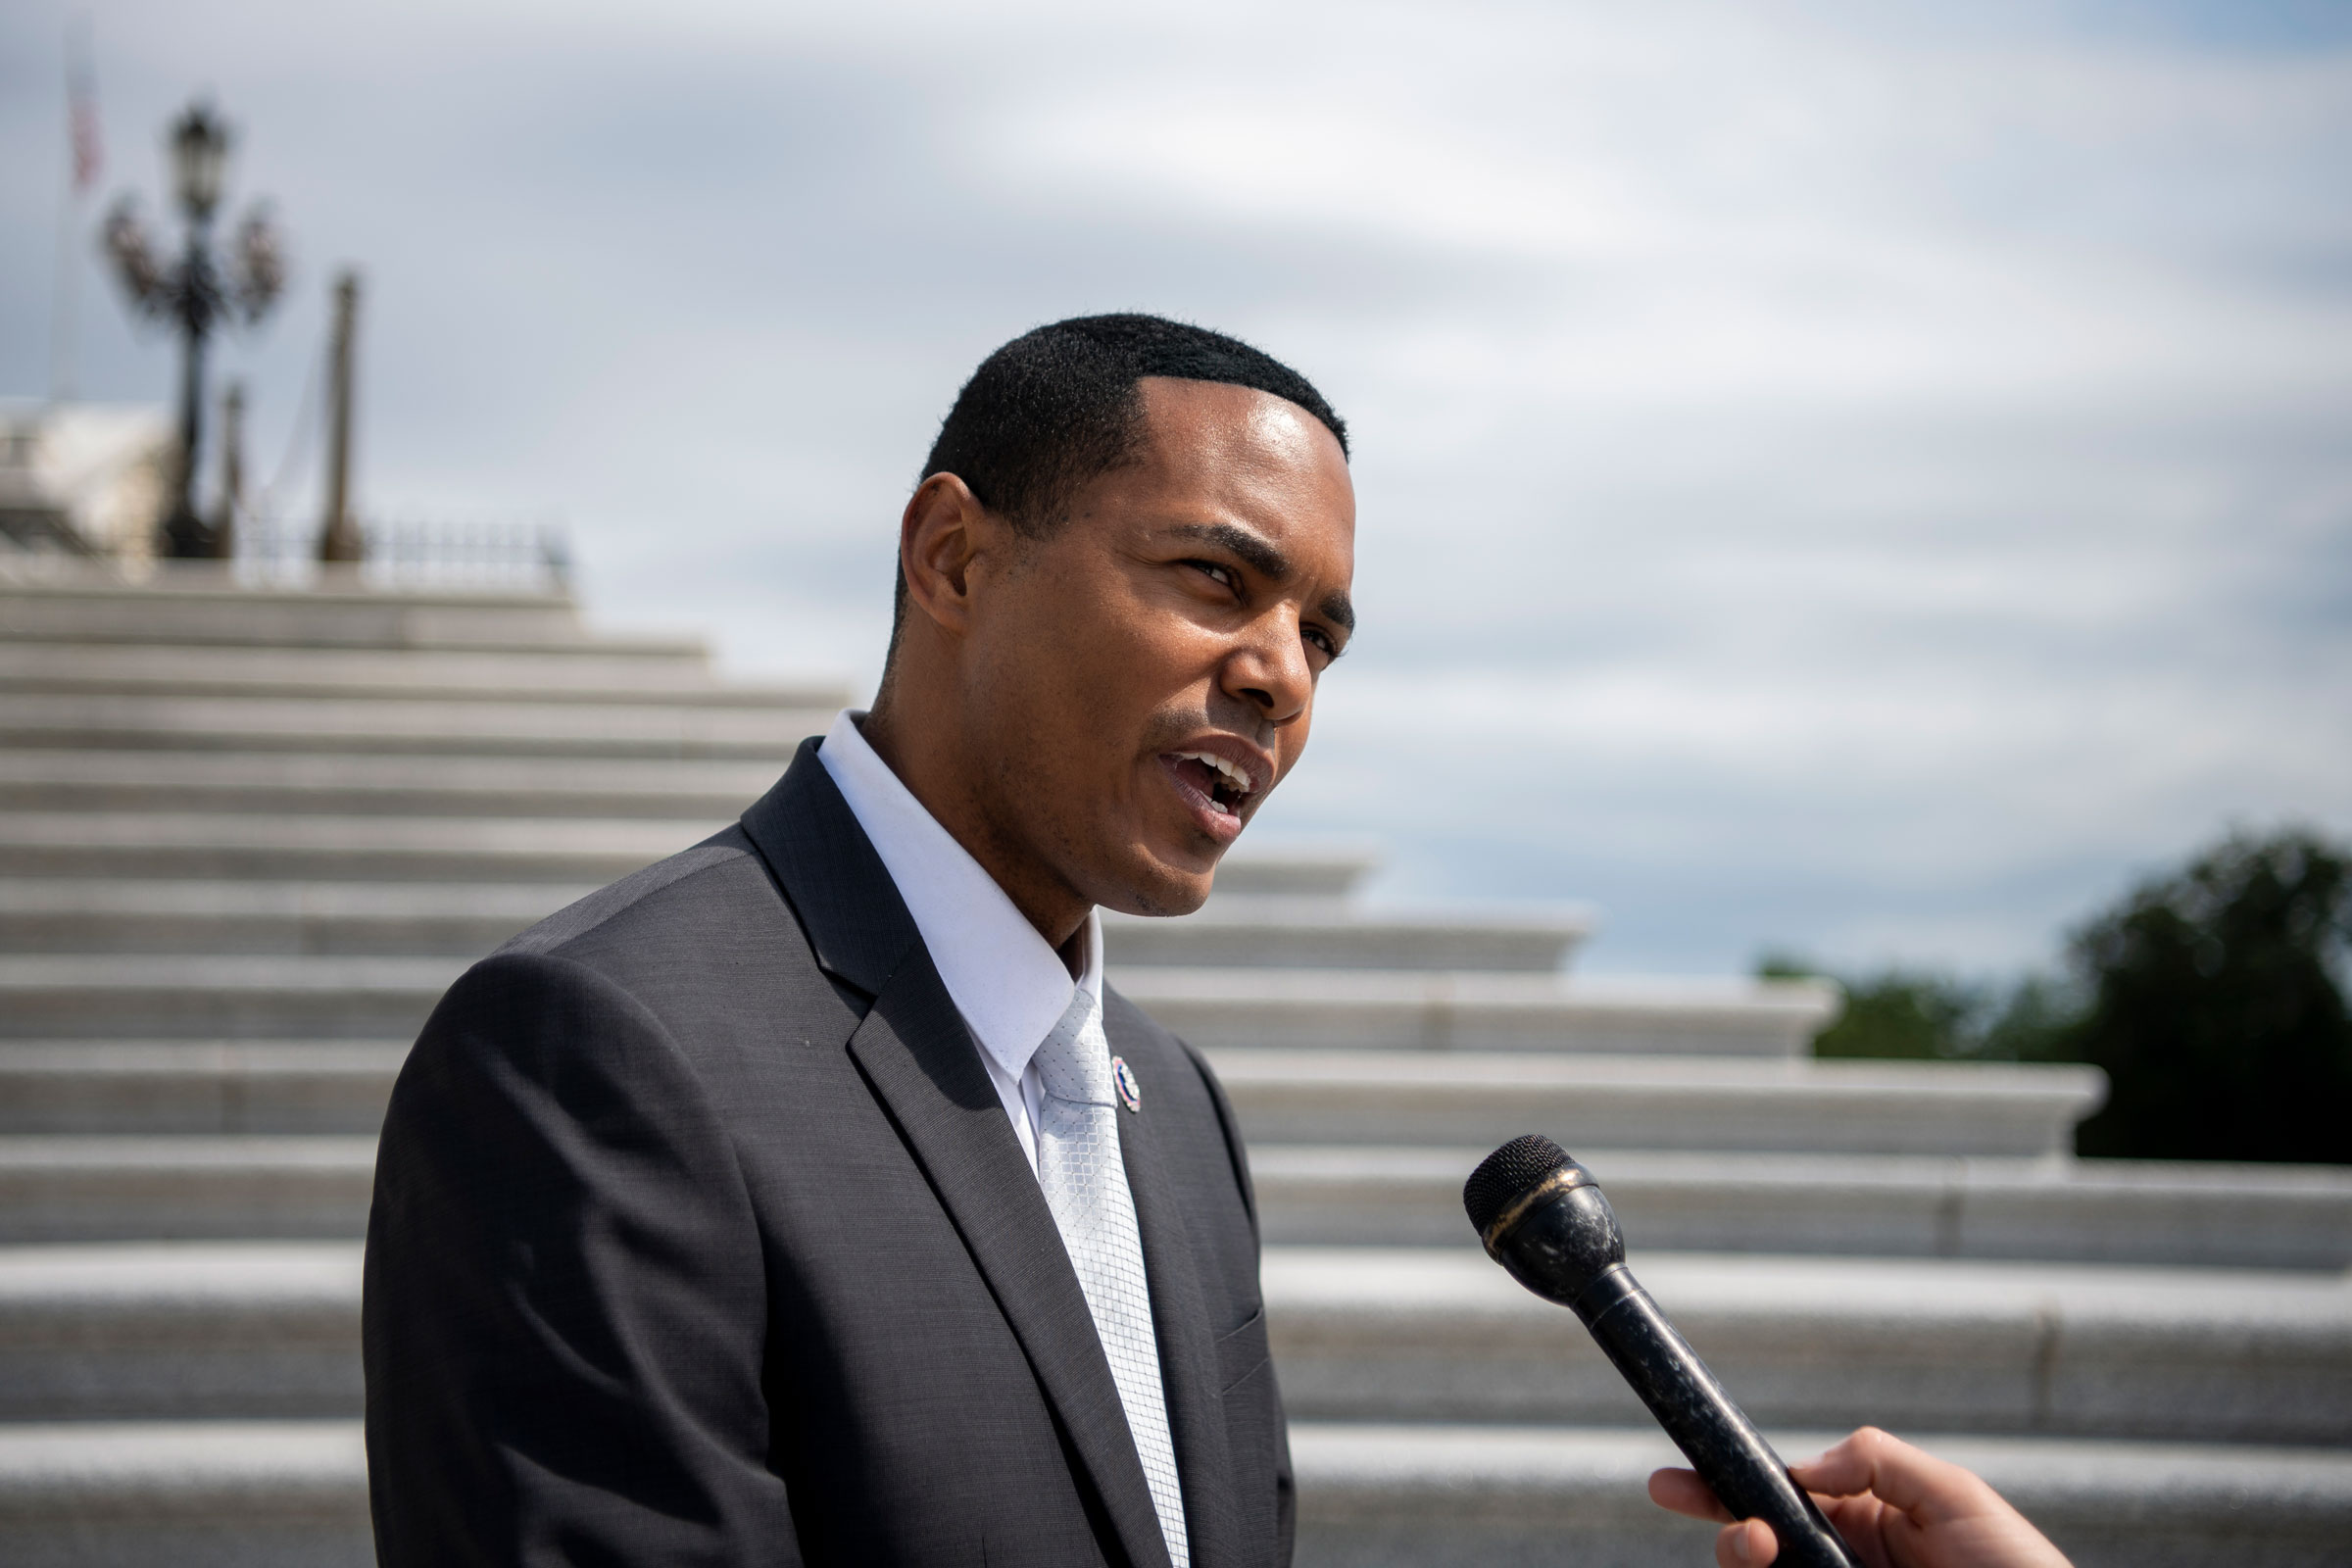 Rep. Ritchie Torres, D-N.Y., talks with a reporter after the last votes of the week in Washington on July 1, 2021. (Caroline Brehman—CQ-Roll Call, Inc/Getty Images)